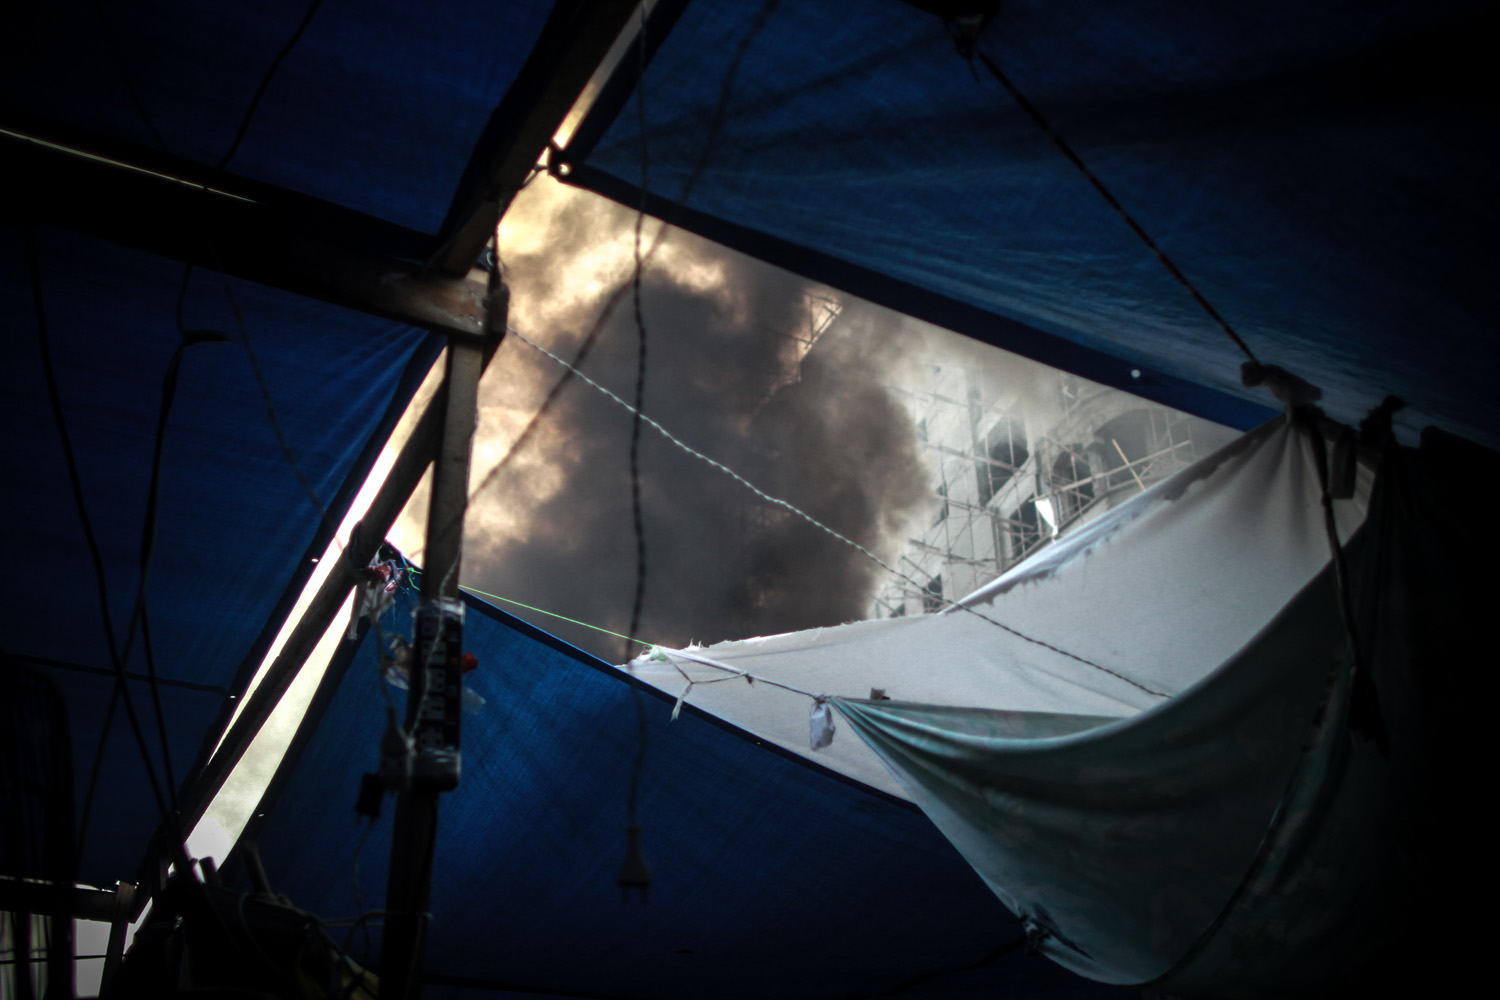 Aug. 14, 2013. Smoke is seen from a tent in Rabaa Adaweya square during the violent dispersal of the camp, where Morsi supporters had camped for 40 days.